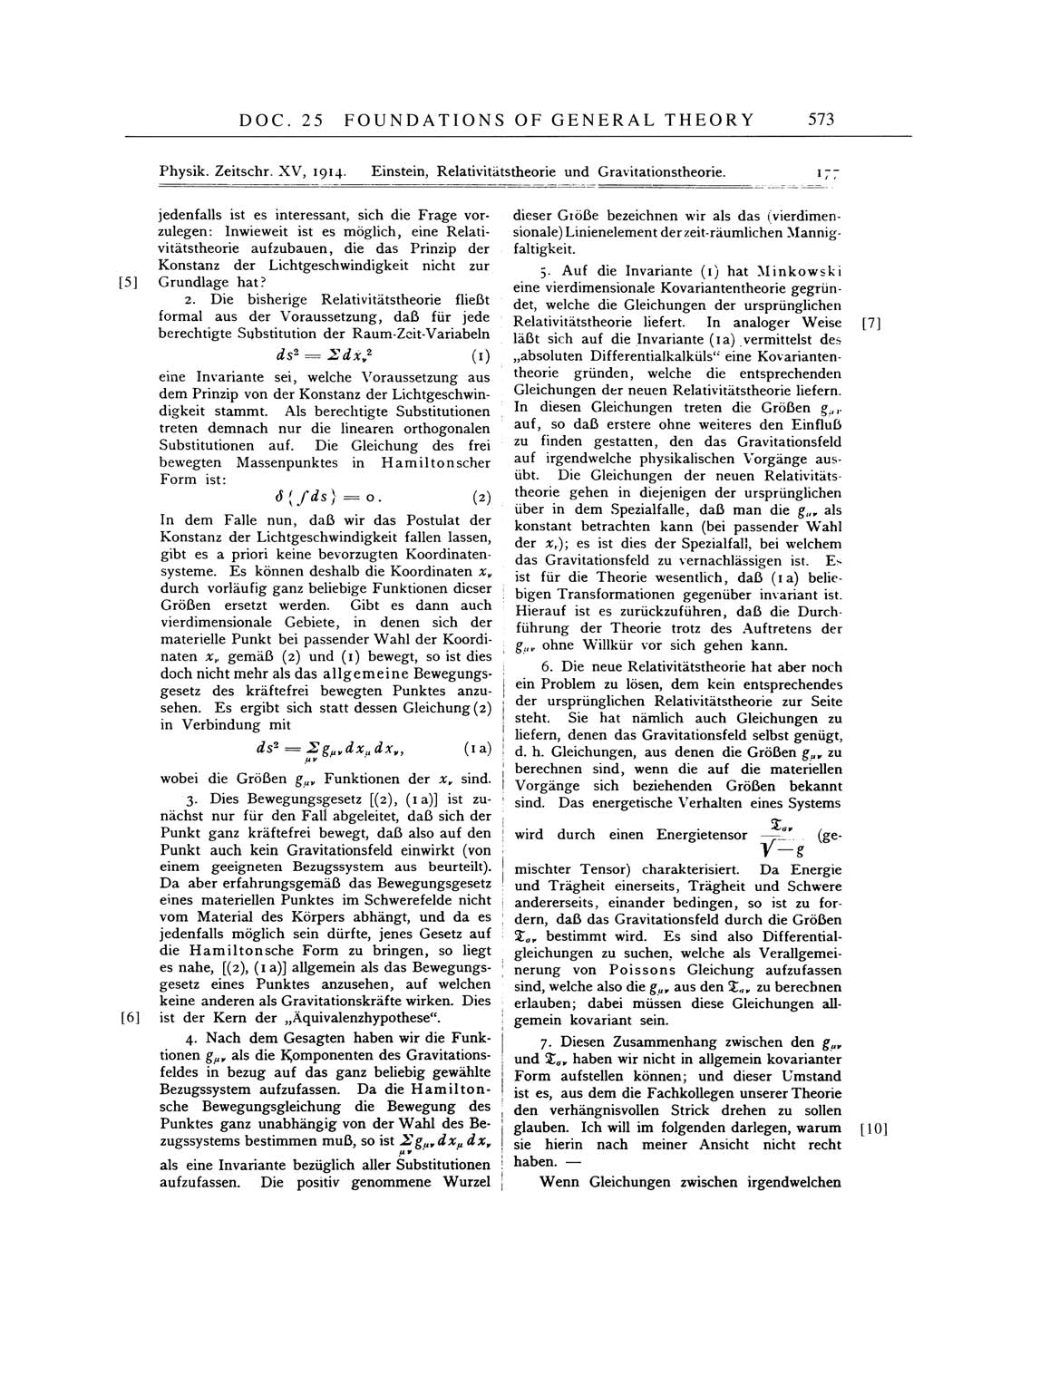 Volume 4: The Swiss Years: Writings 1912-1914 page 573